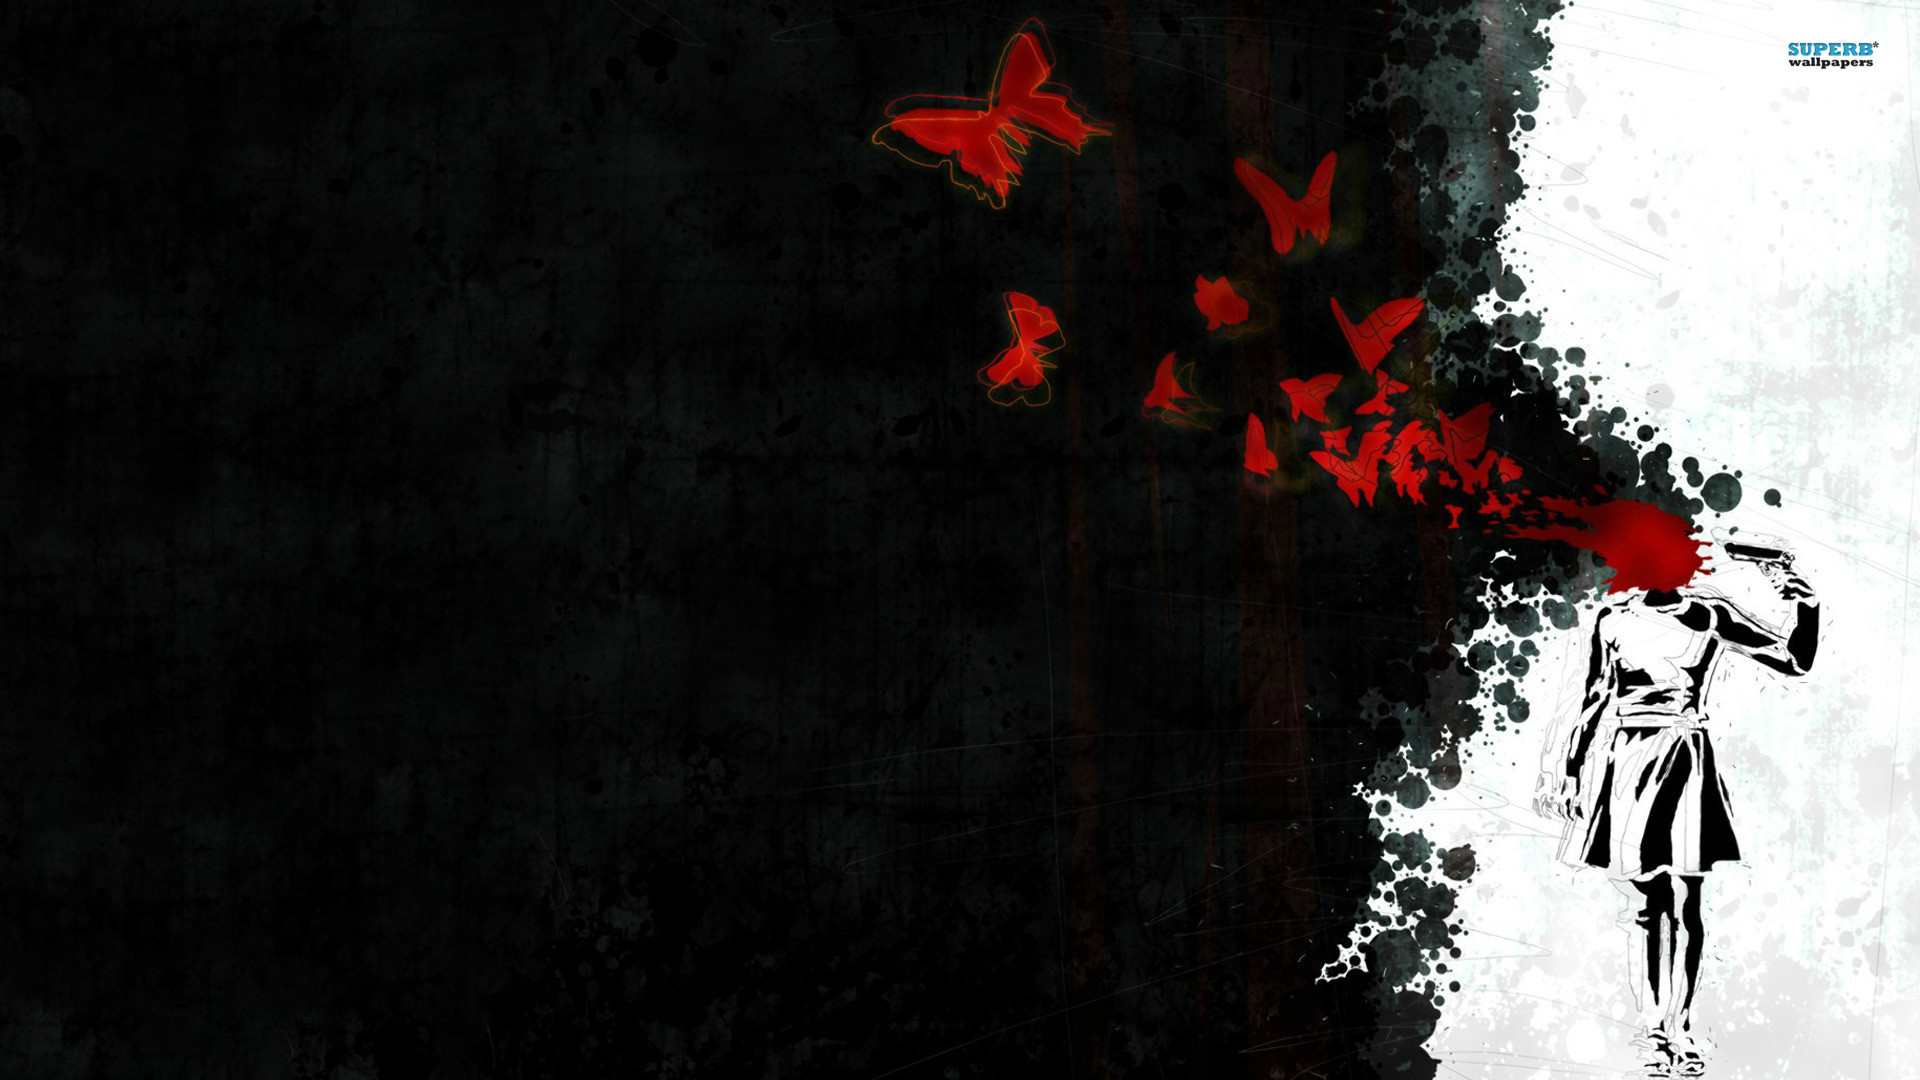 1920x1080 Suicide - Fantasy Abstract Background Wallpapers on Desktop